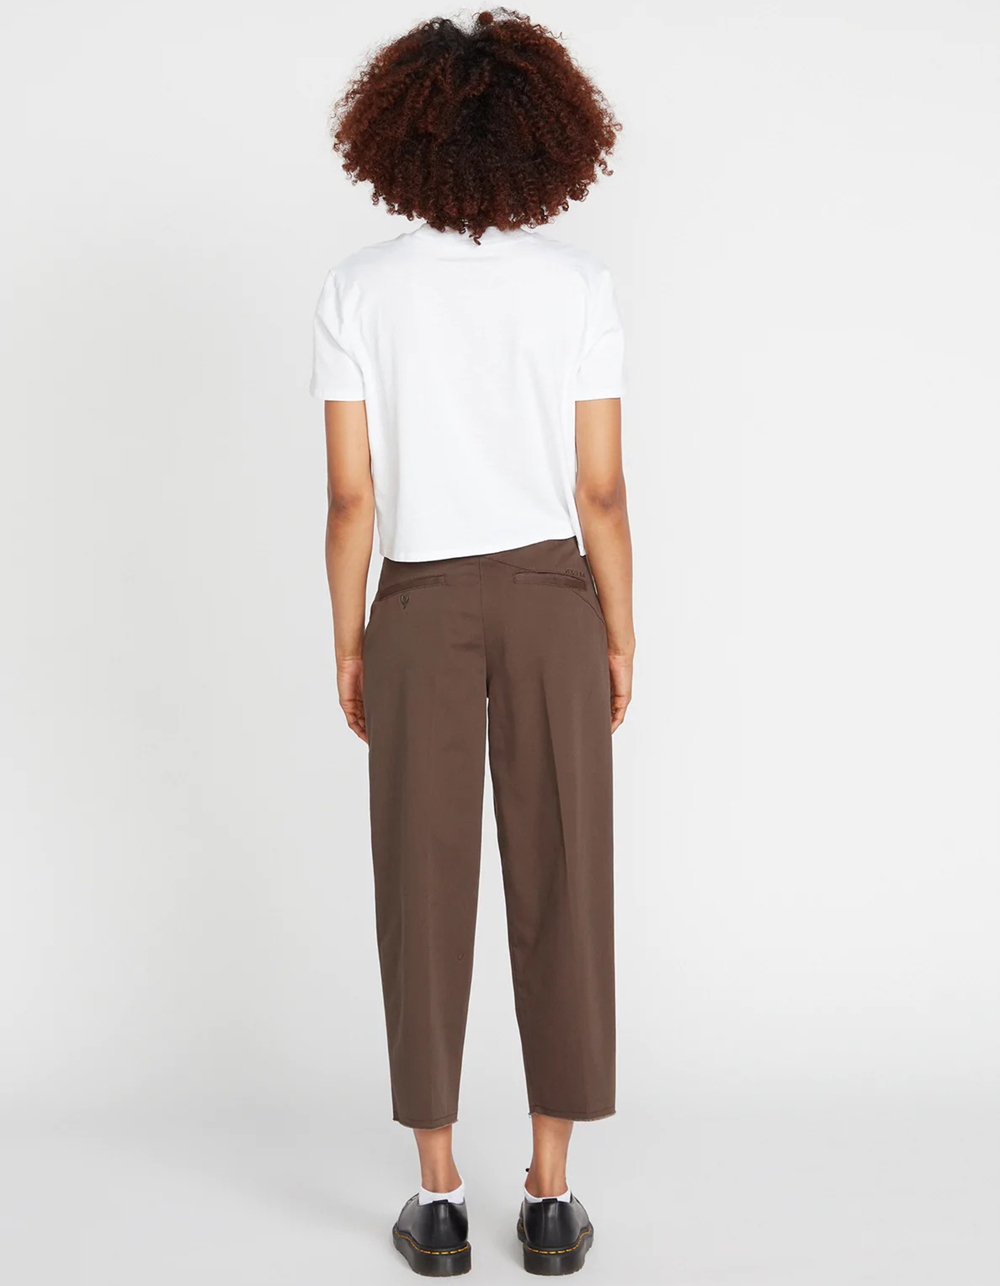 VOLCOM Whawhat Womens Chino Pants - BROWN | Tillys